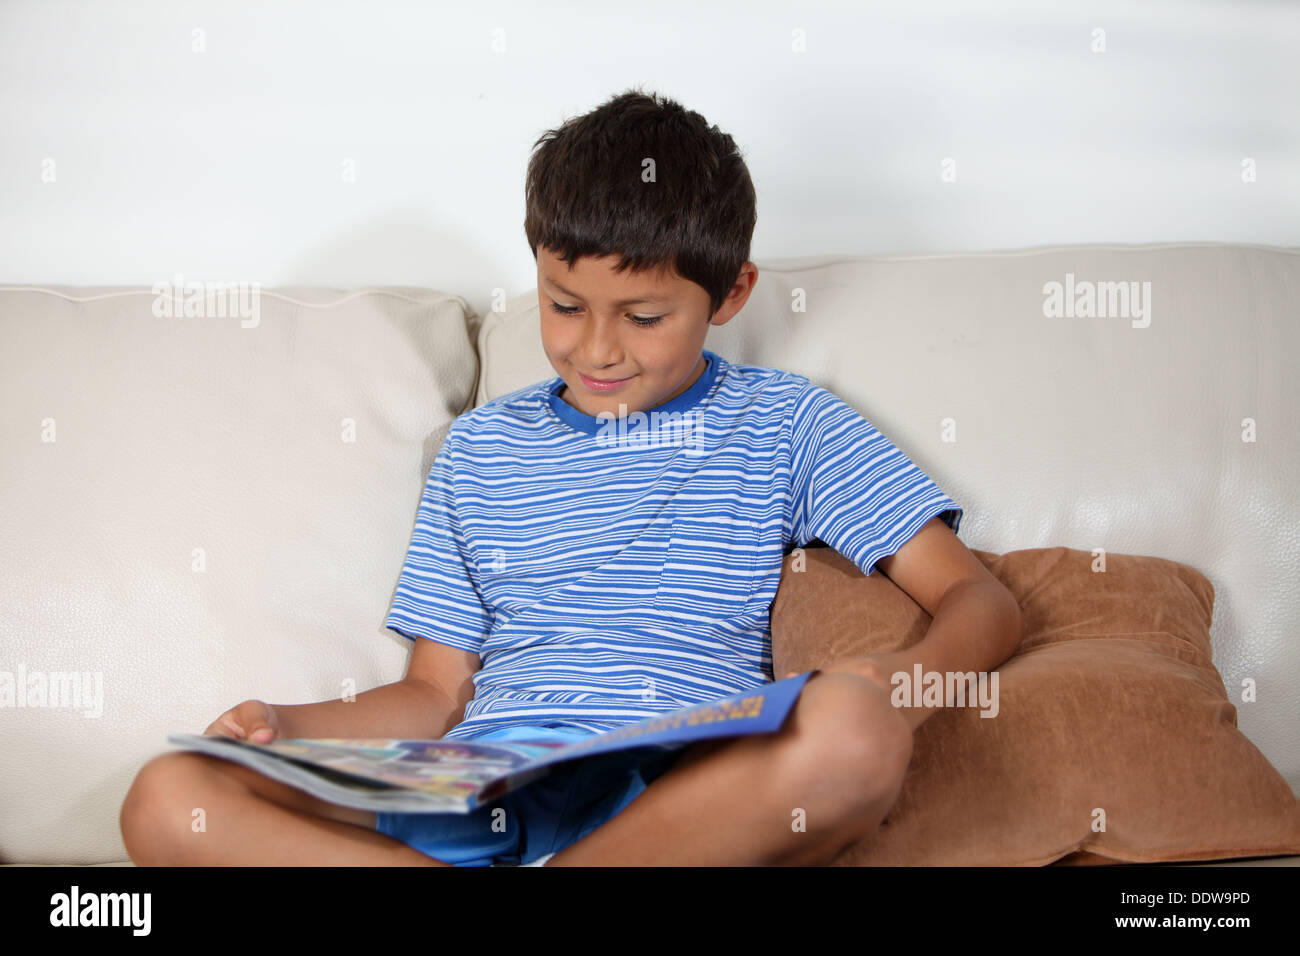 Young boy on the sofa reading a magazine Stock Photo